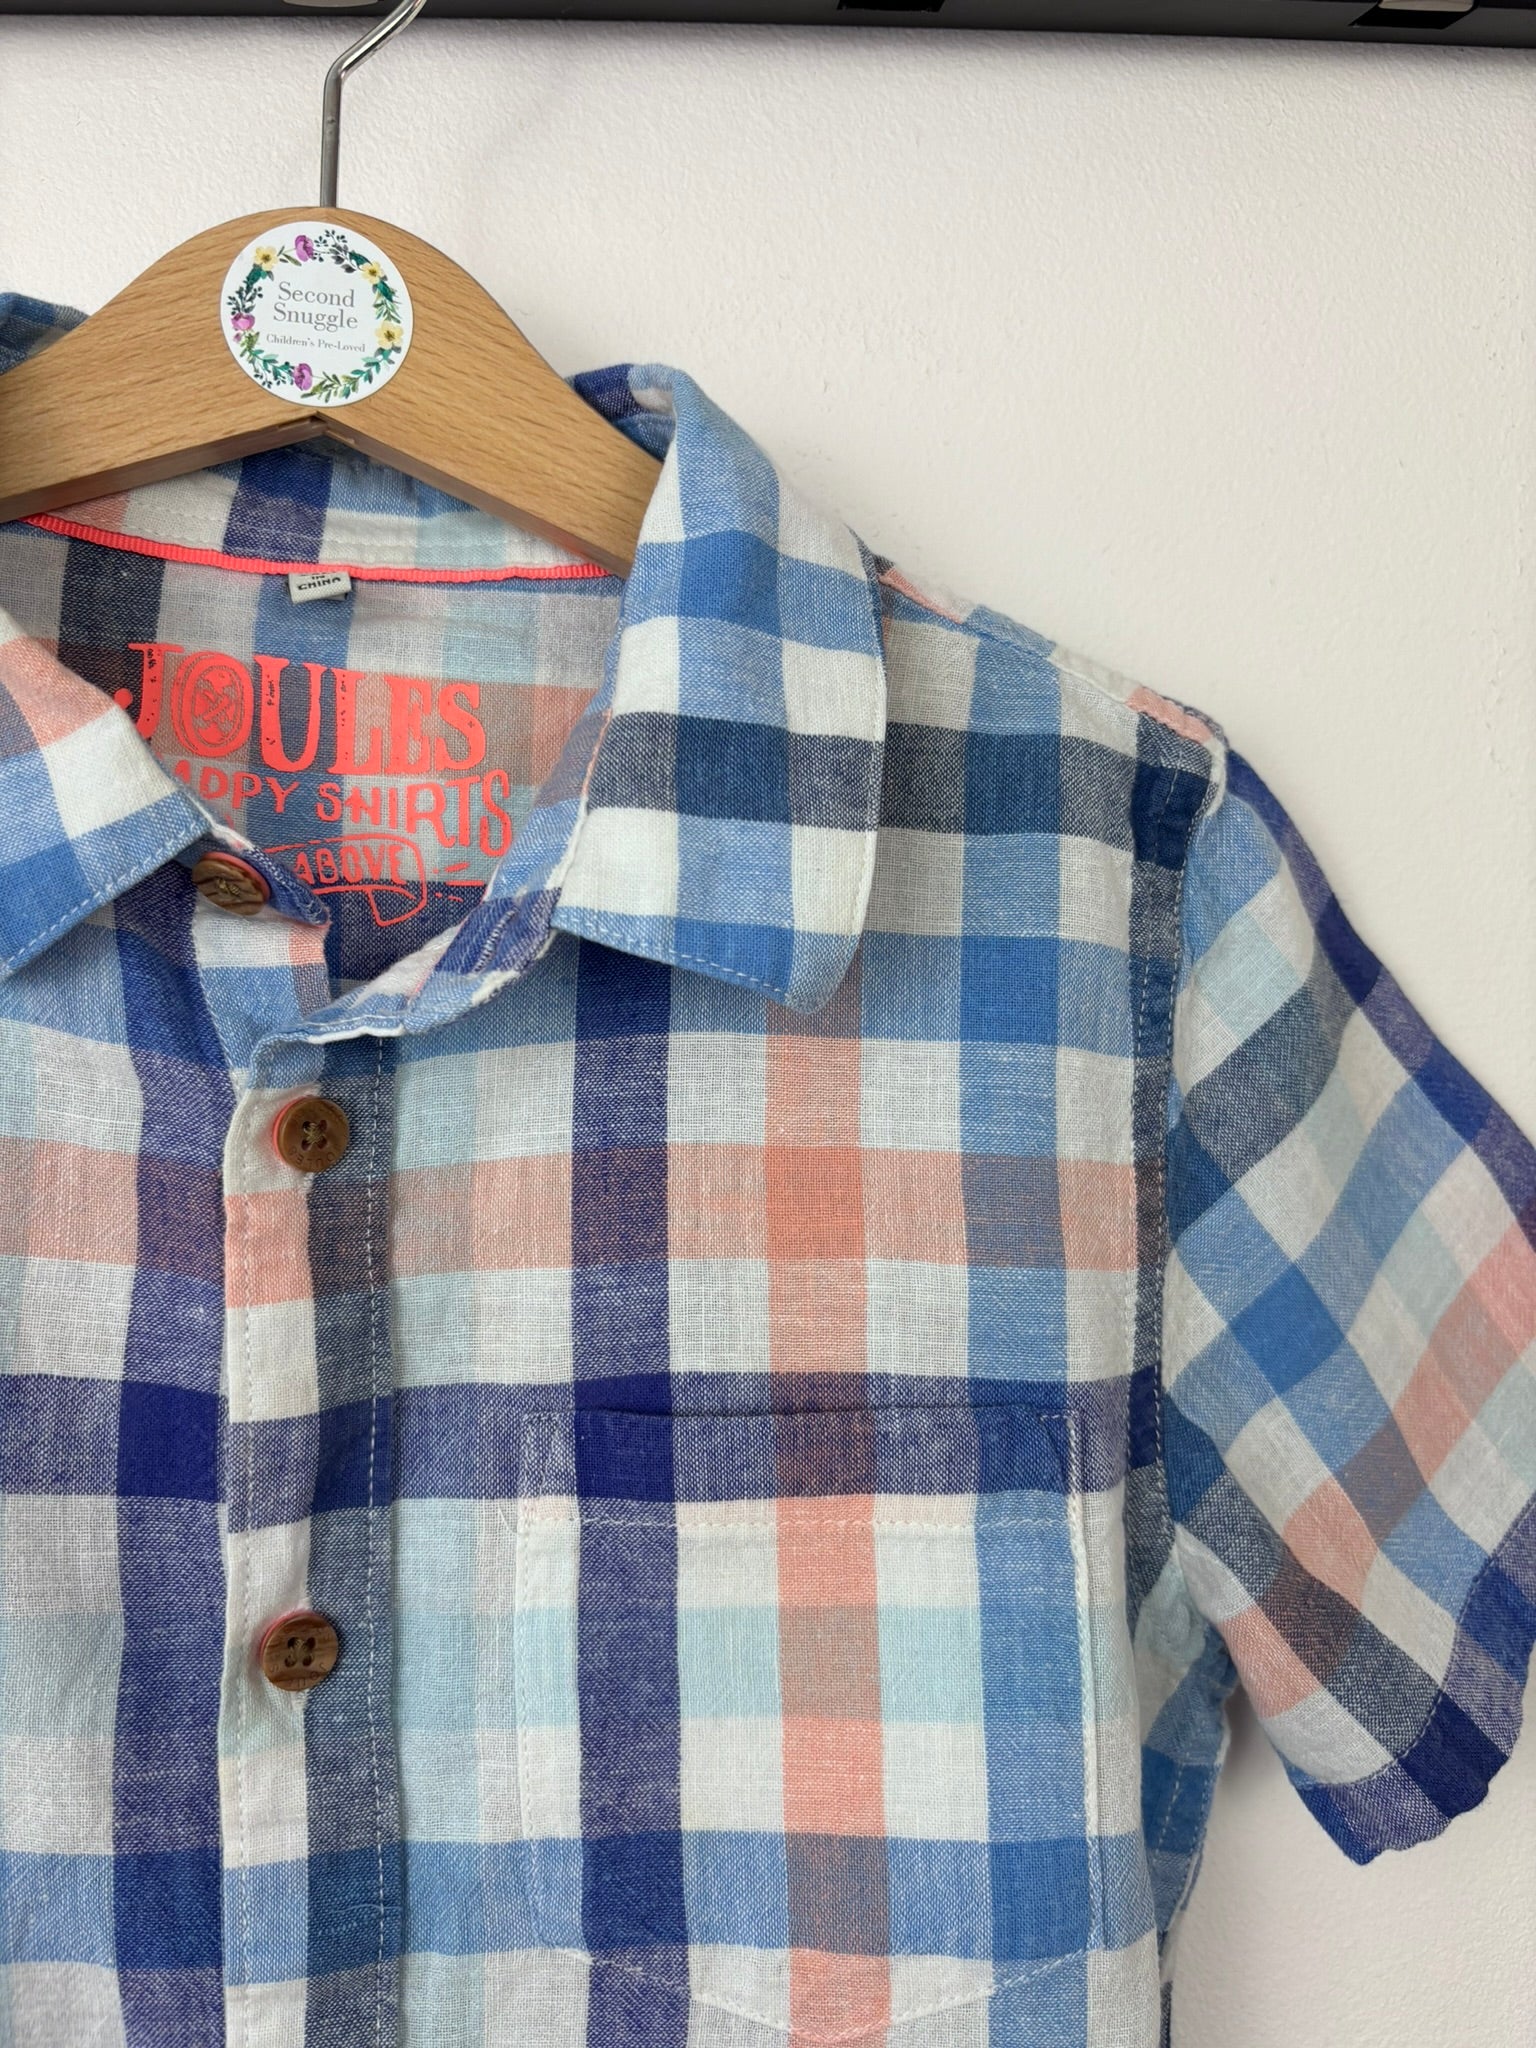 Joules 7-8 Years-Shirts-Second Snuggle Preloved